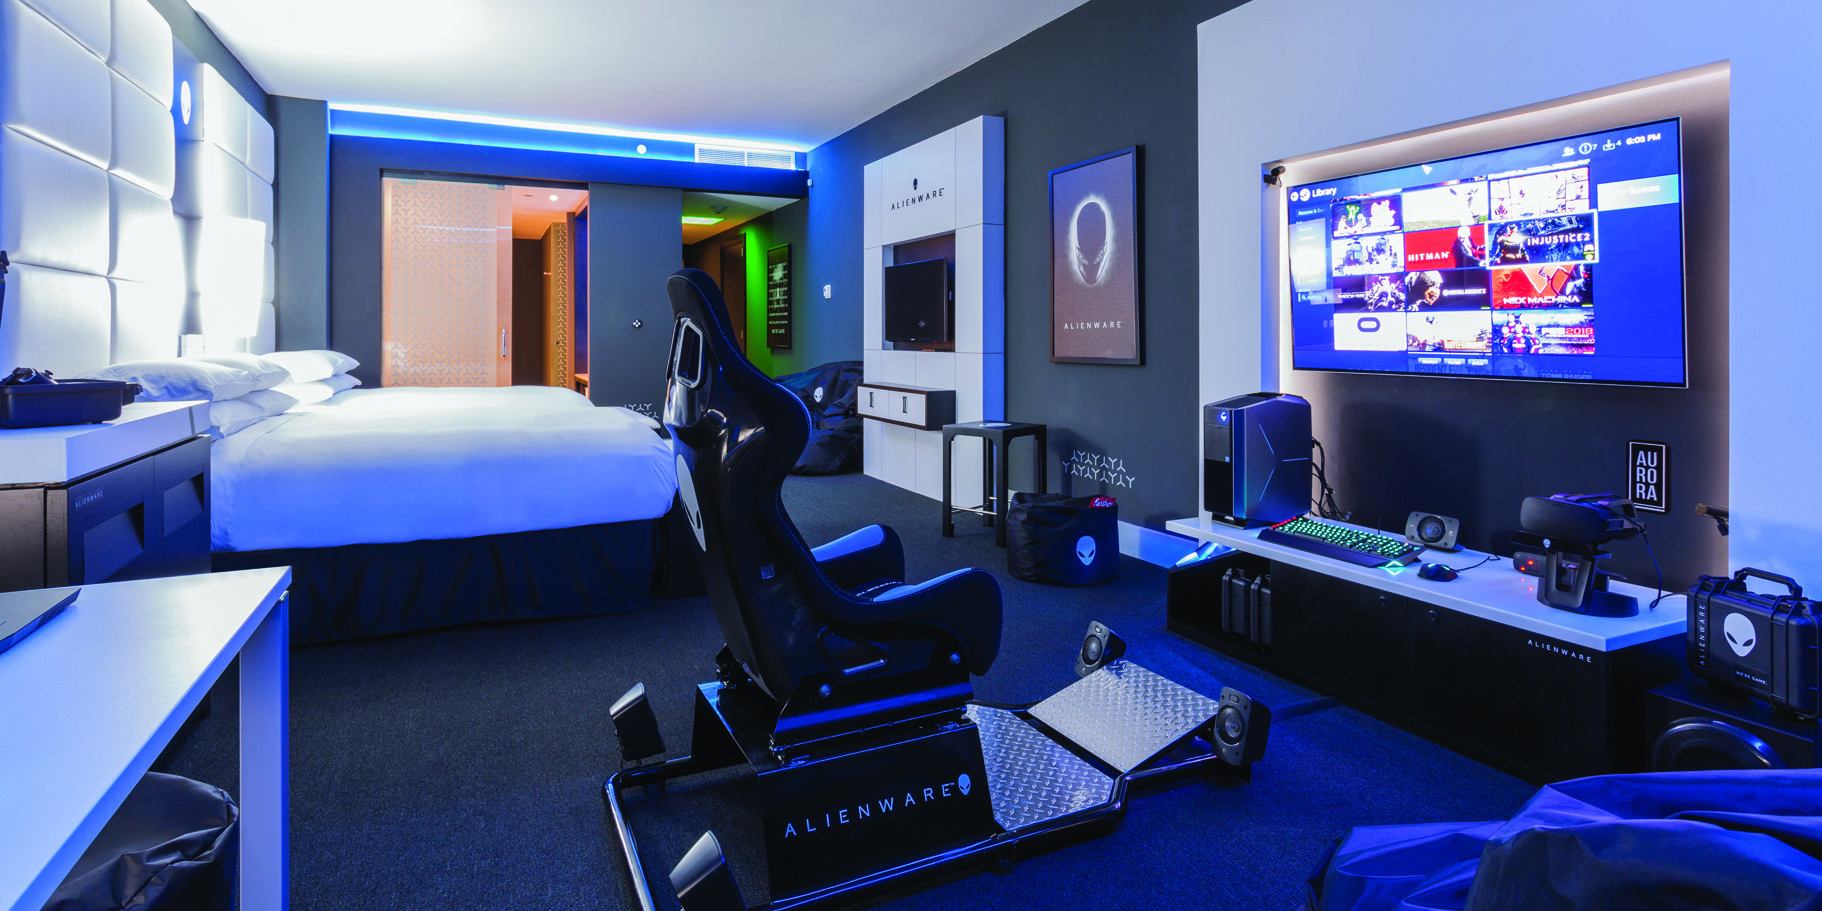 The B est Gaming Hotel Room for Getting Stuck In